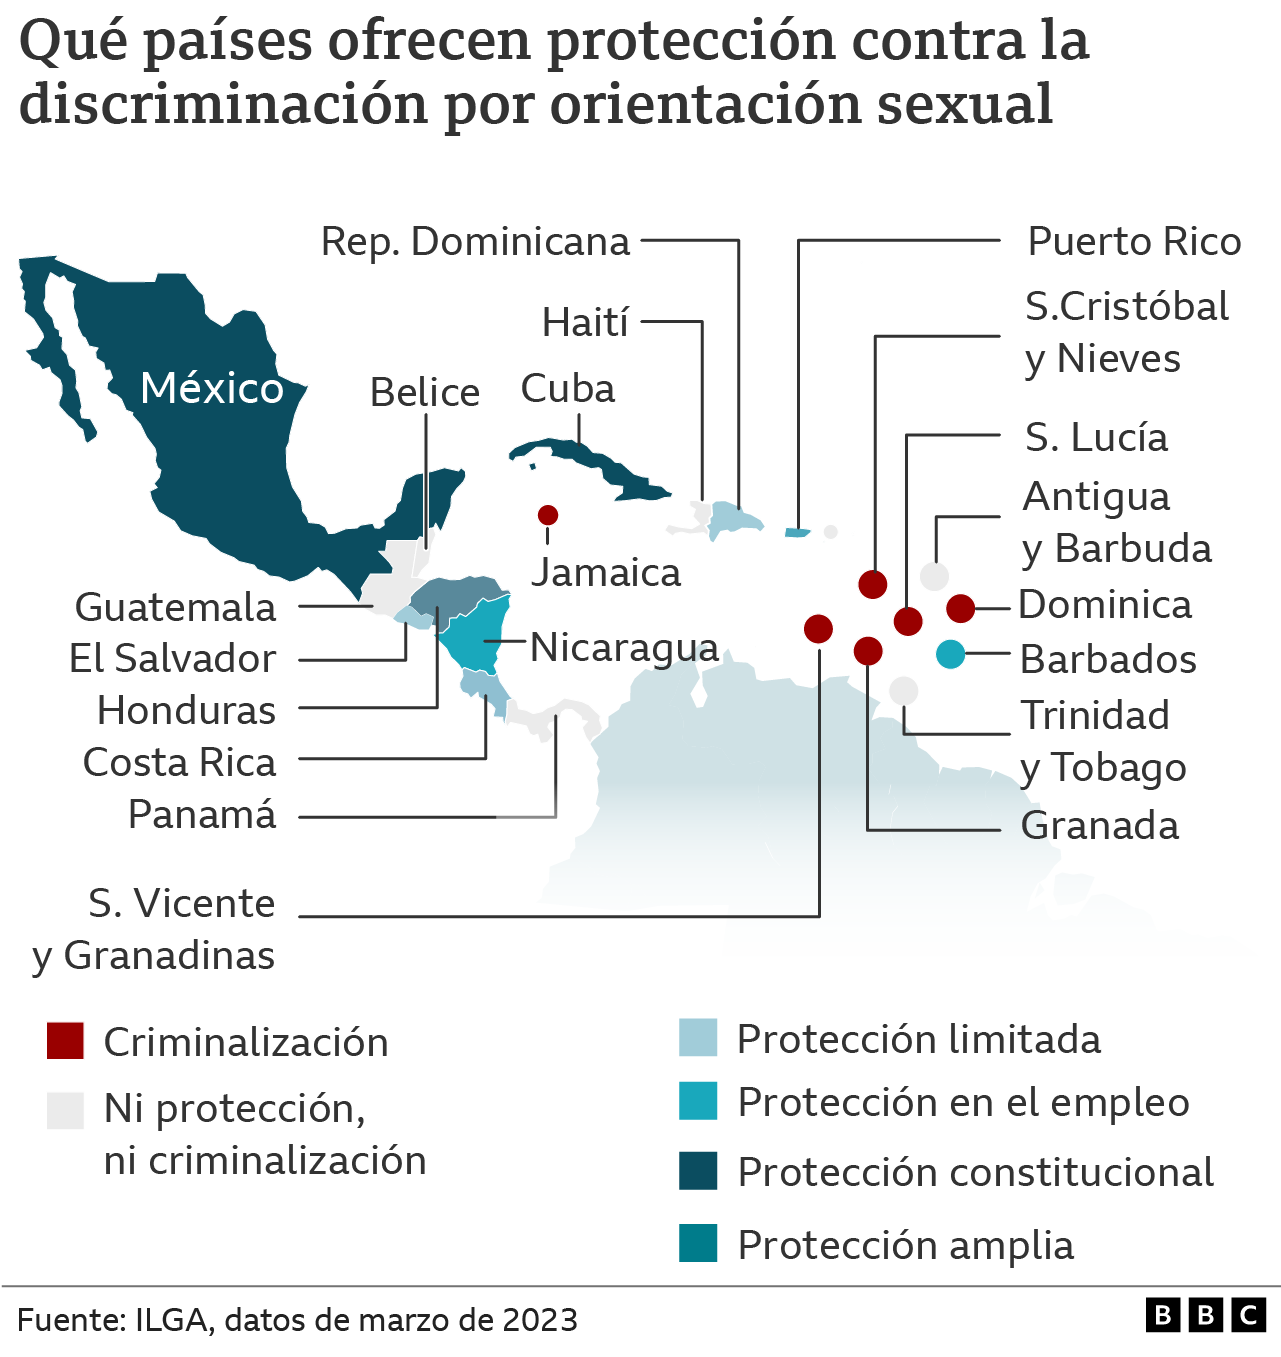 Map of the situation of homosexual people in Central America and the Caribbean.